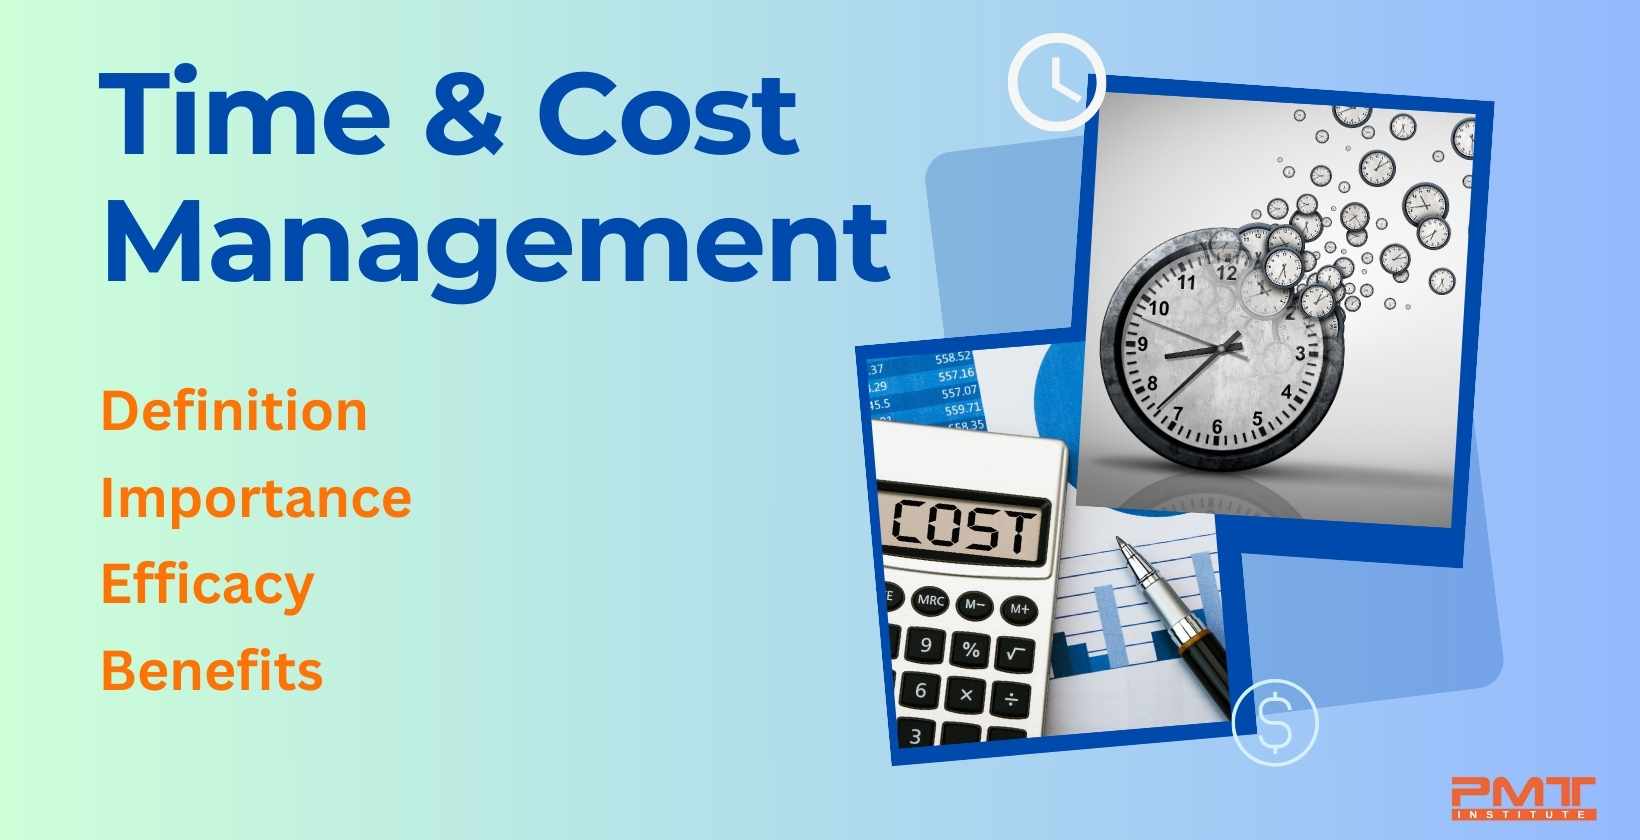 Time and cost management: Definition, Importance, Efficacy, and Benefits